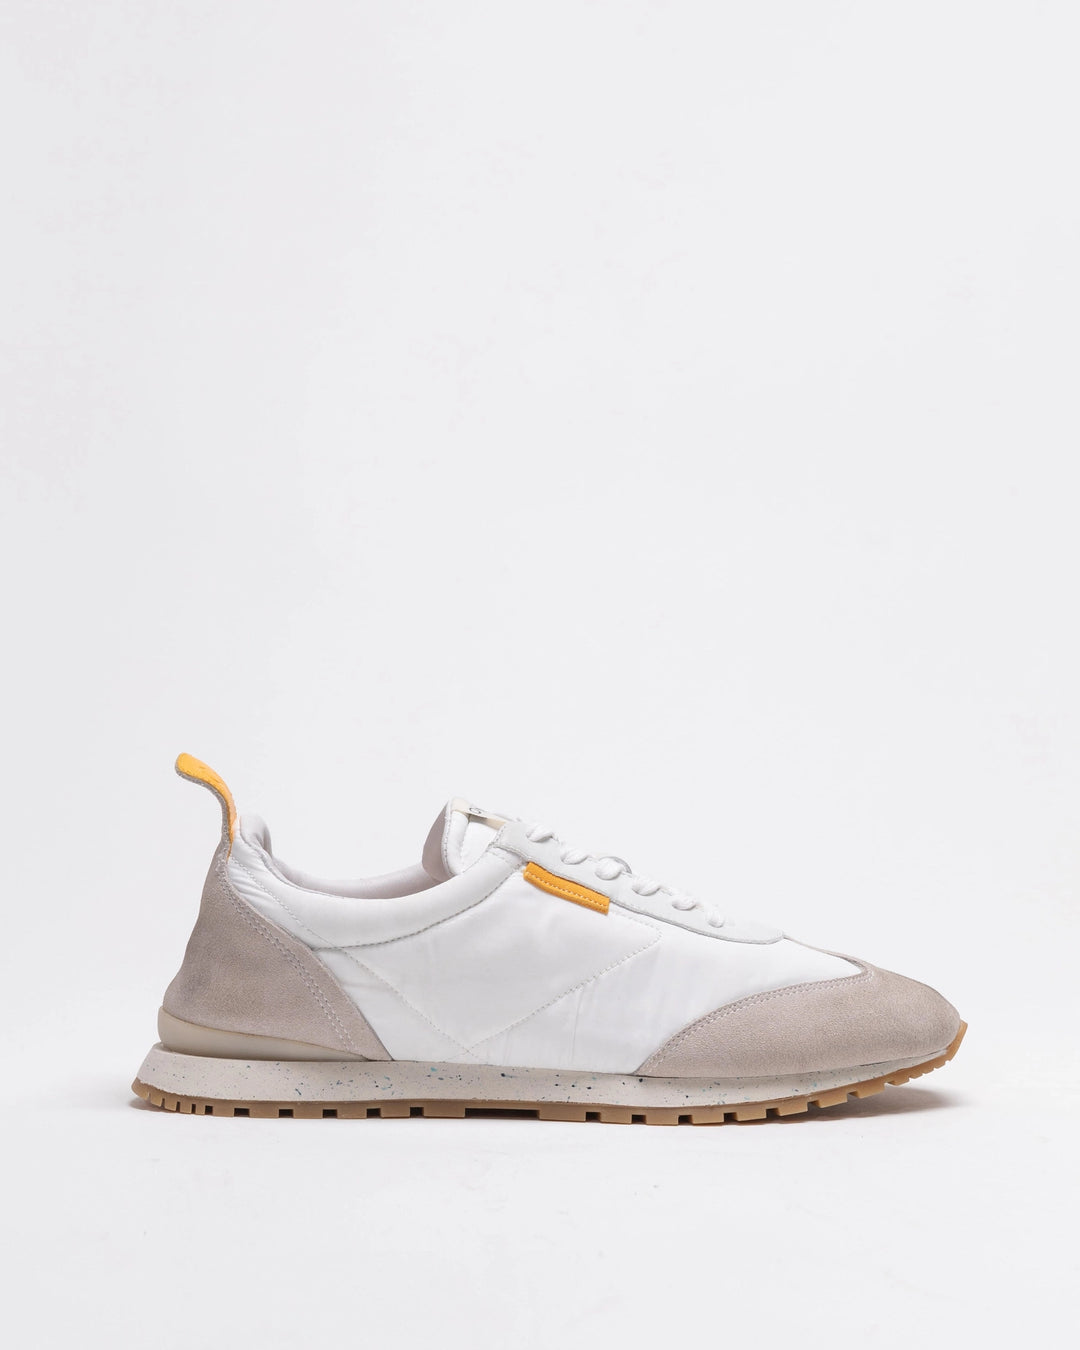 Oncept - Tokyo Sneaker in white cloud is a great addition to your everyday sneaker collection. These sustainable water resistant nylon, chrome free suede, re-speckled midsole and tencel twill linings add the conscious effort to your wardrobe.